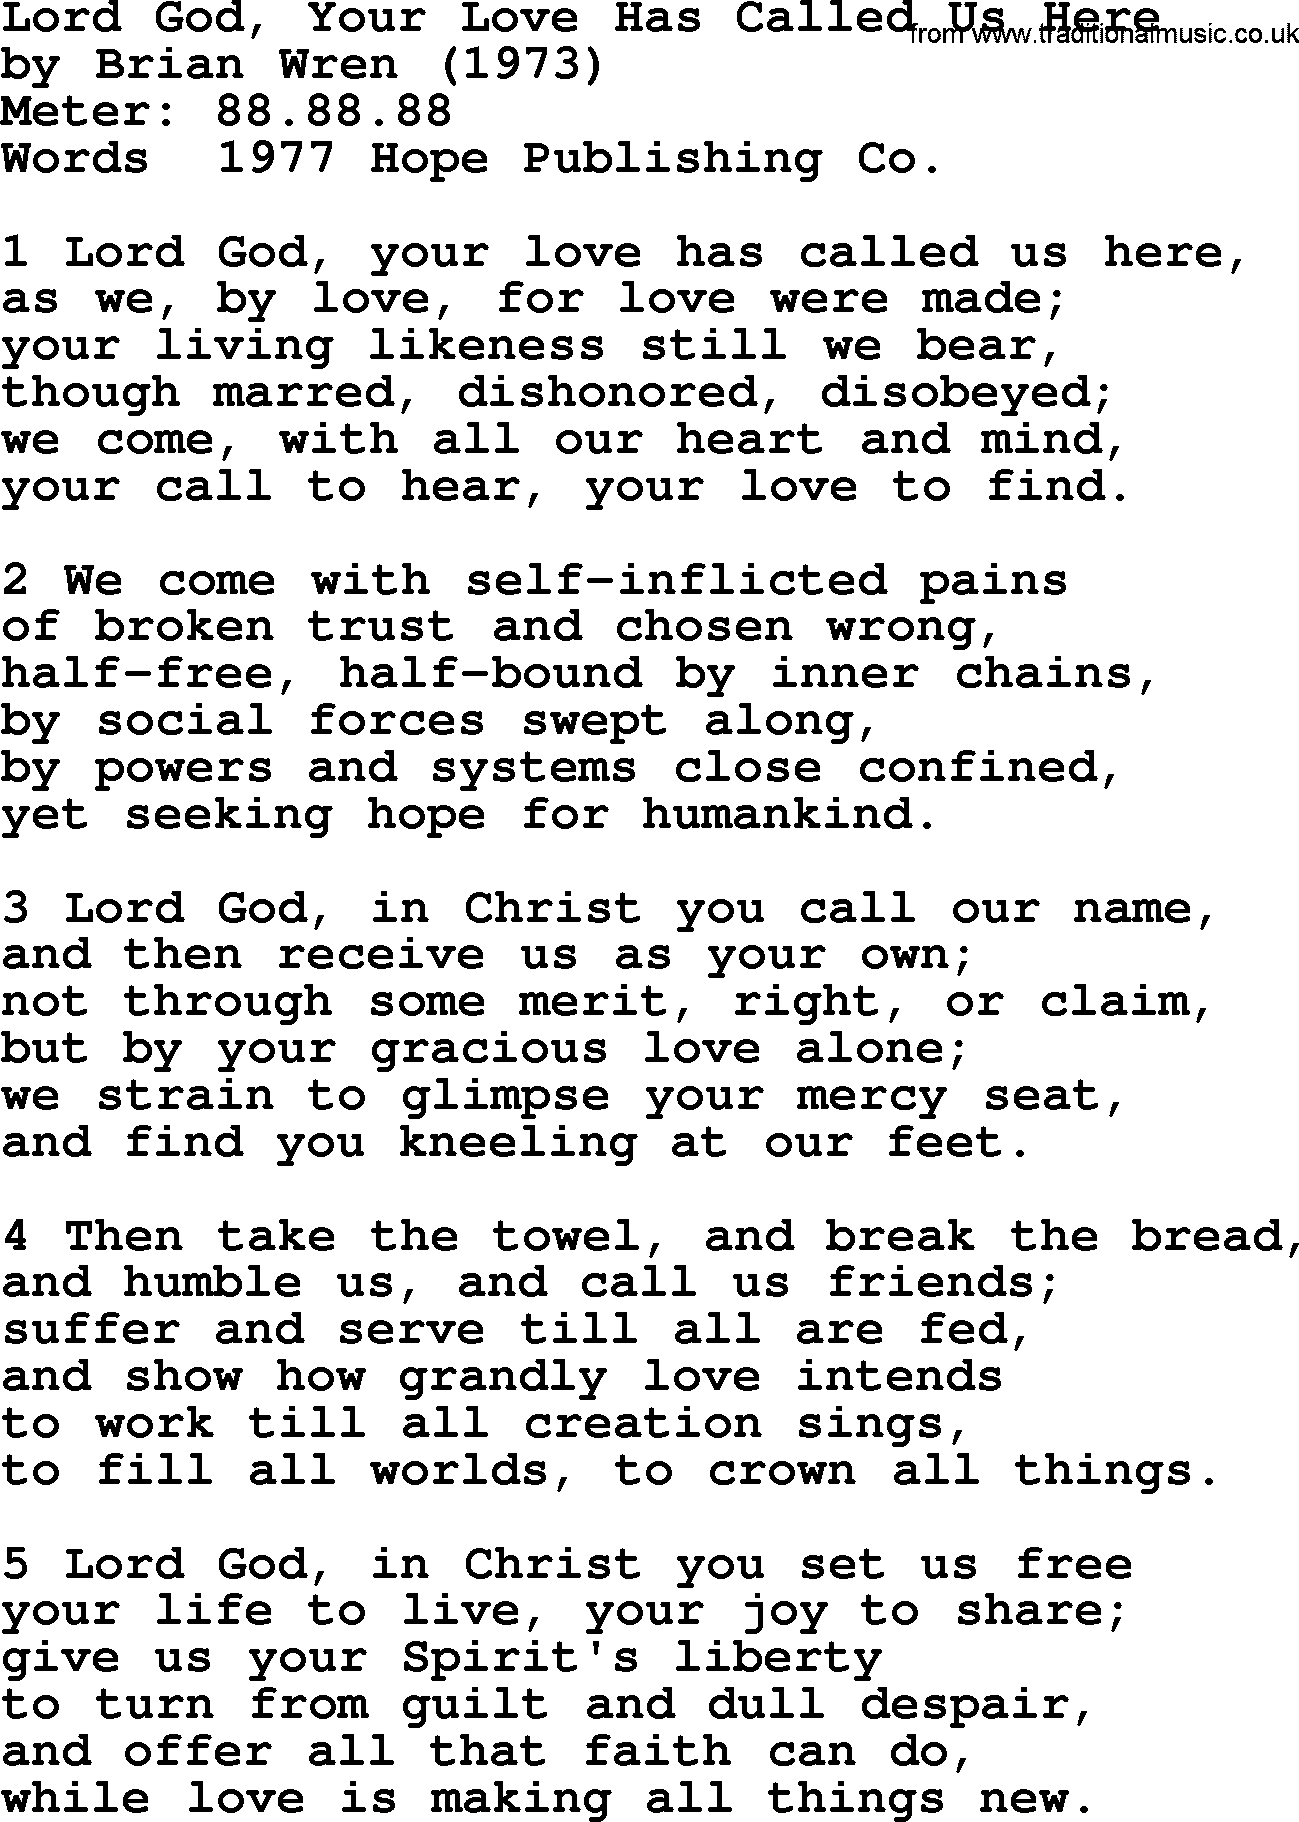 A collection of 500+ most sung Christian church hymns and songs, title: Lord God, Your Love Has Called Us Here~, lyrics, PPTX and PDF